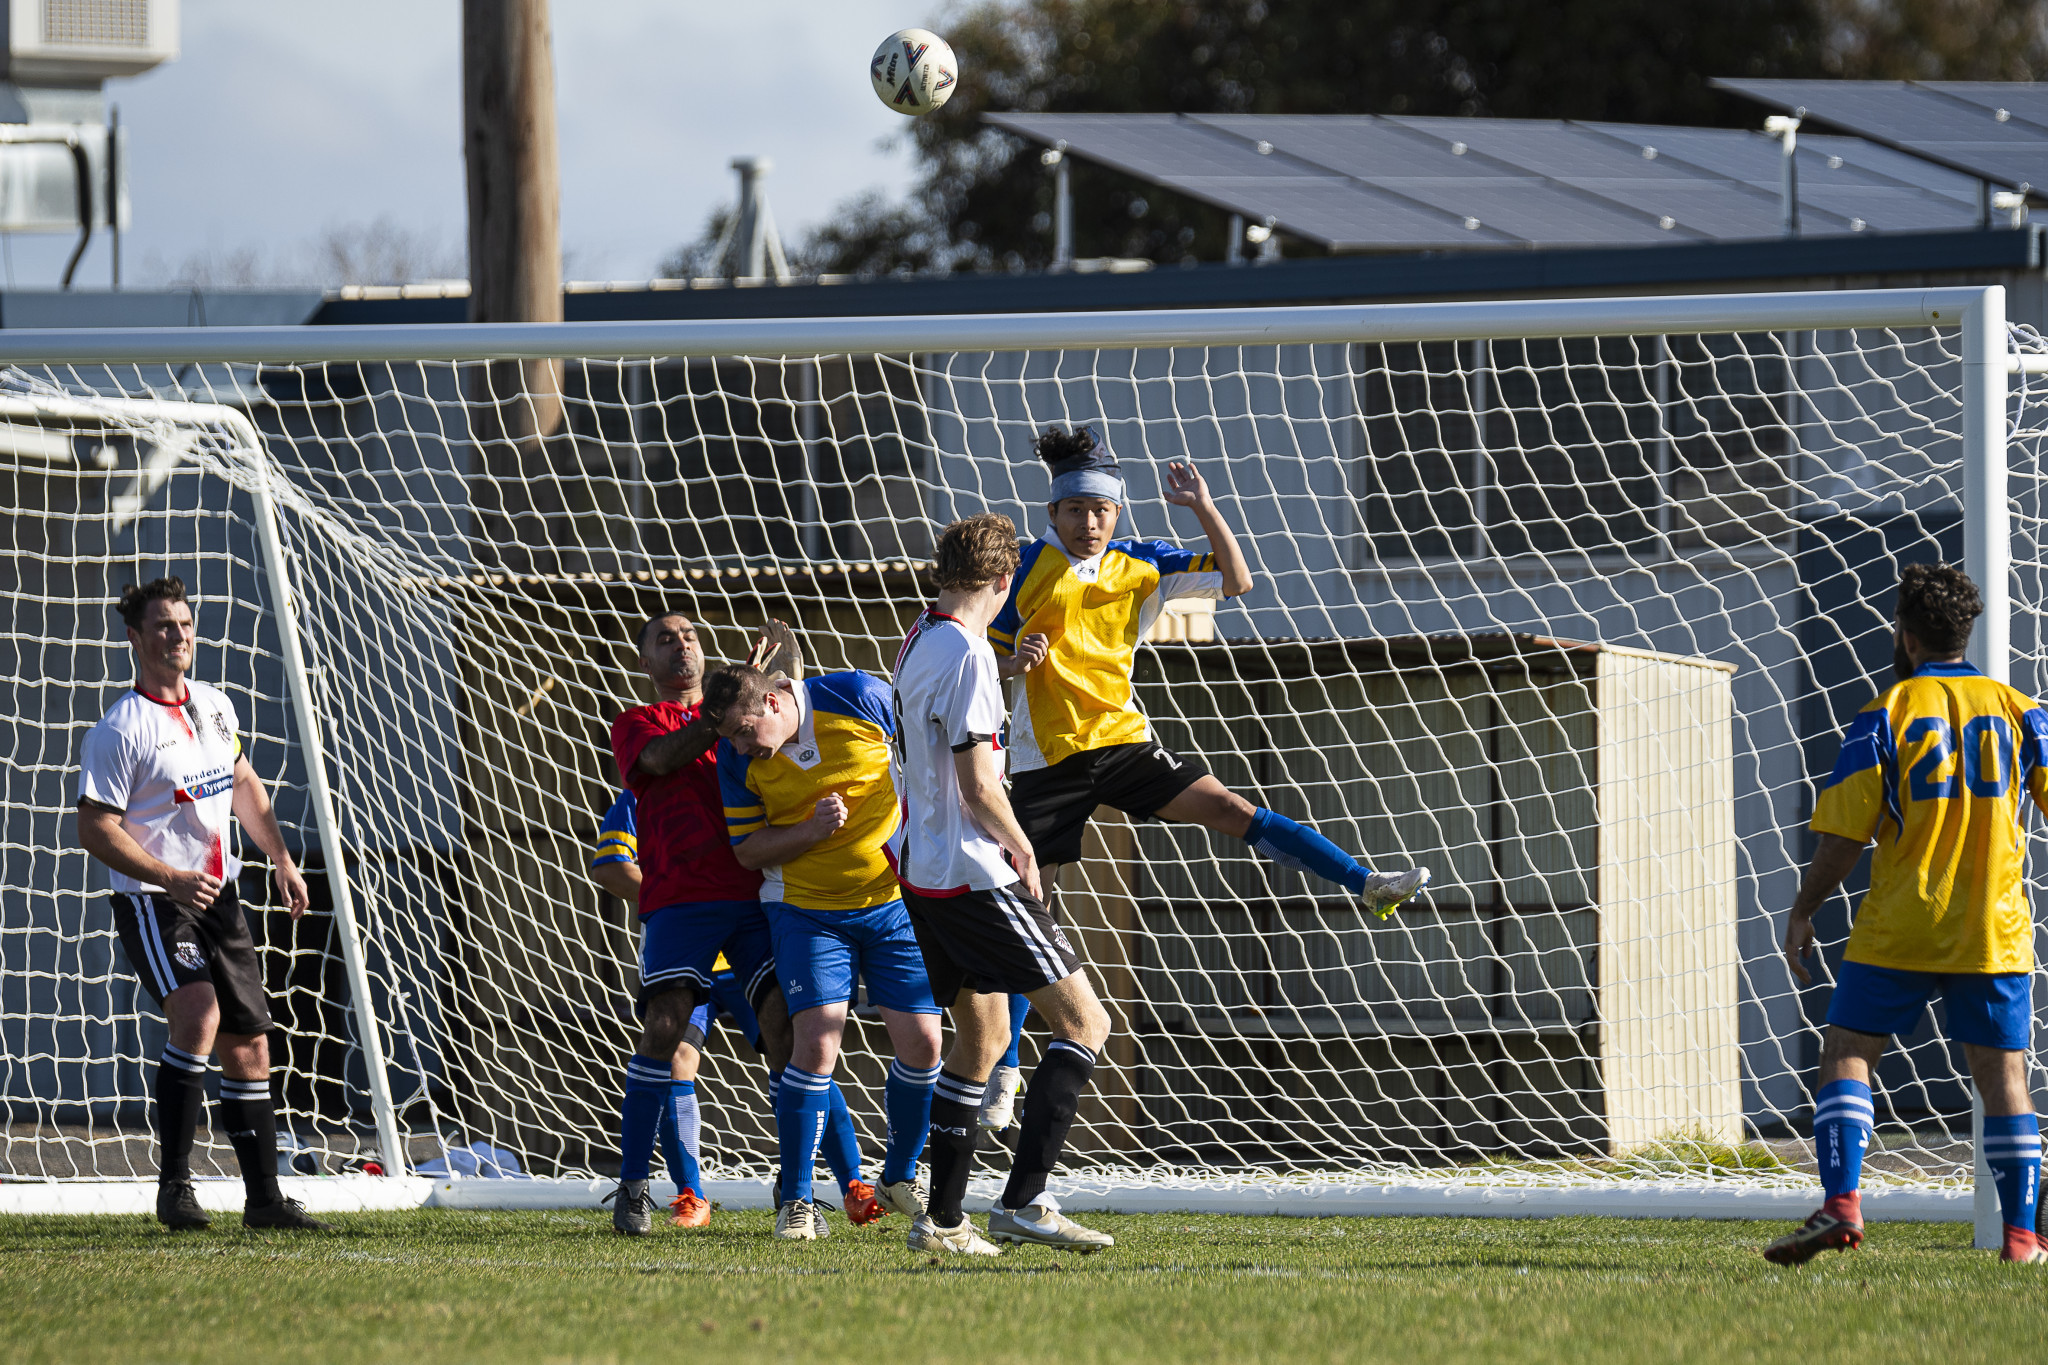 Pway Nay Kaw Wah contesting for a header to defend in front of goal. PHOTO: DARREN ISAAC